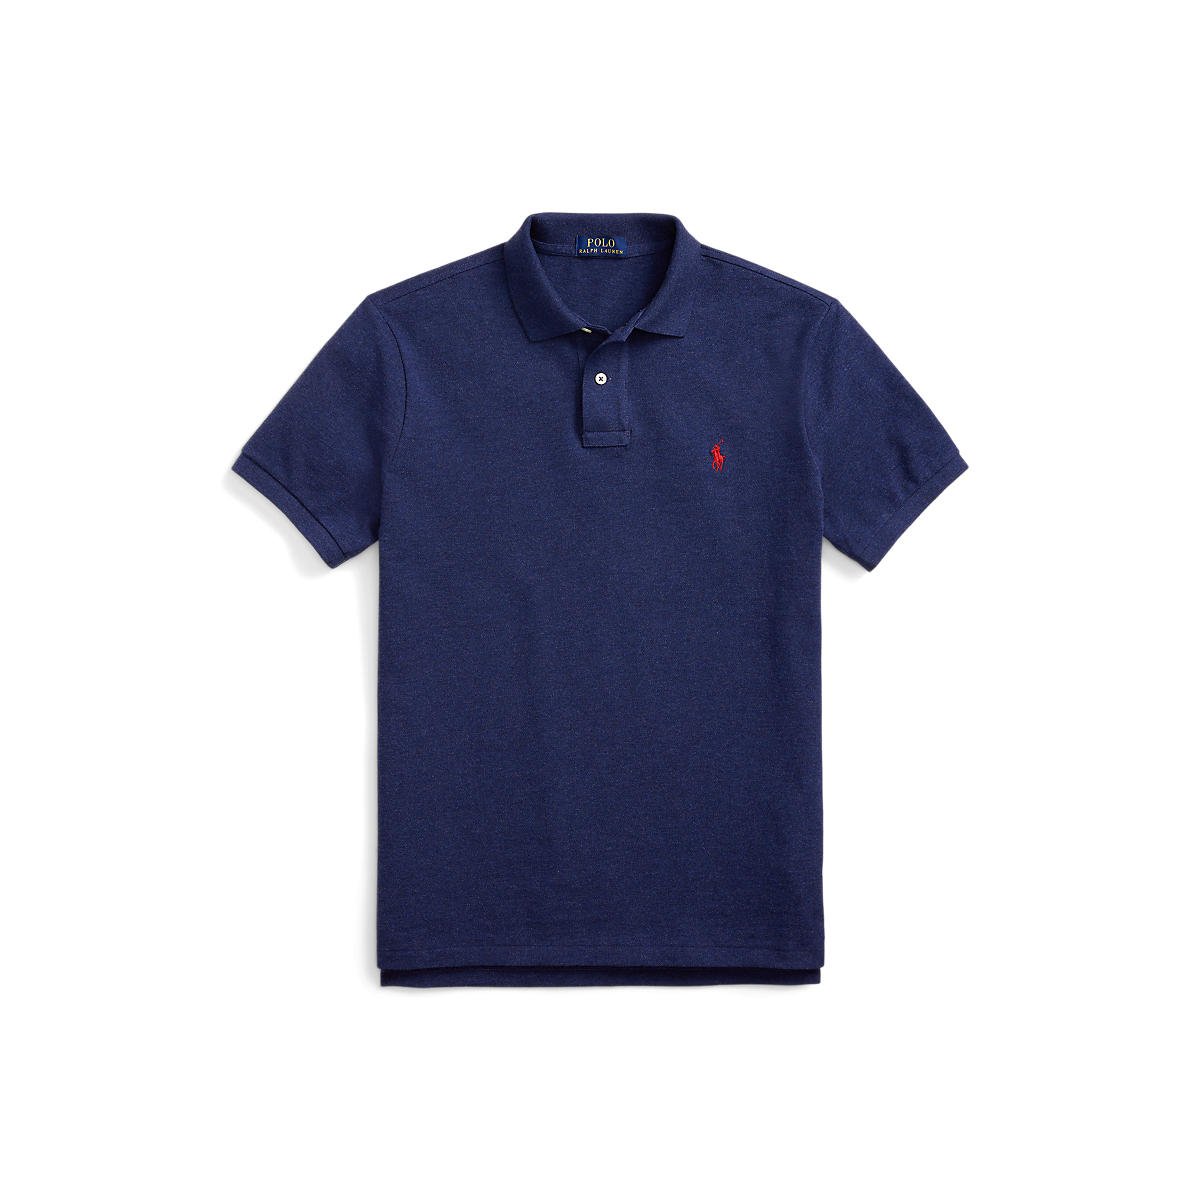 710534735342 Polo Ralph Lauren Classic Fit Mesh Polo Shirt Spring Navy Heather, P5,565 from P7,950.jpeg